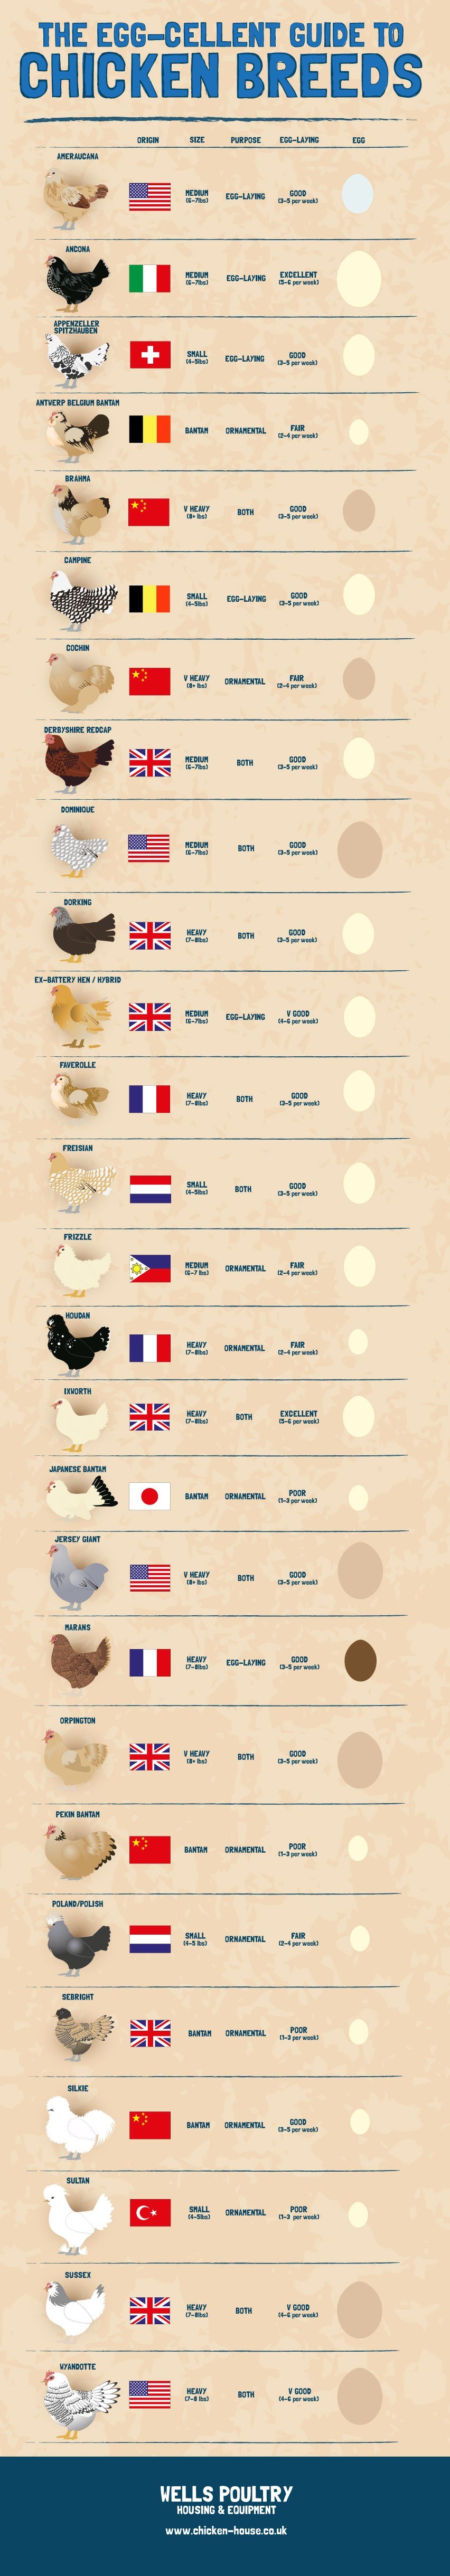 the-eggcellent-guide-to-chicken-breeds_518a5ab62bebb